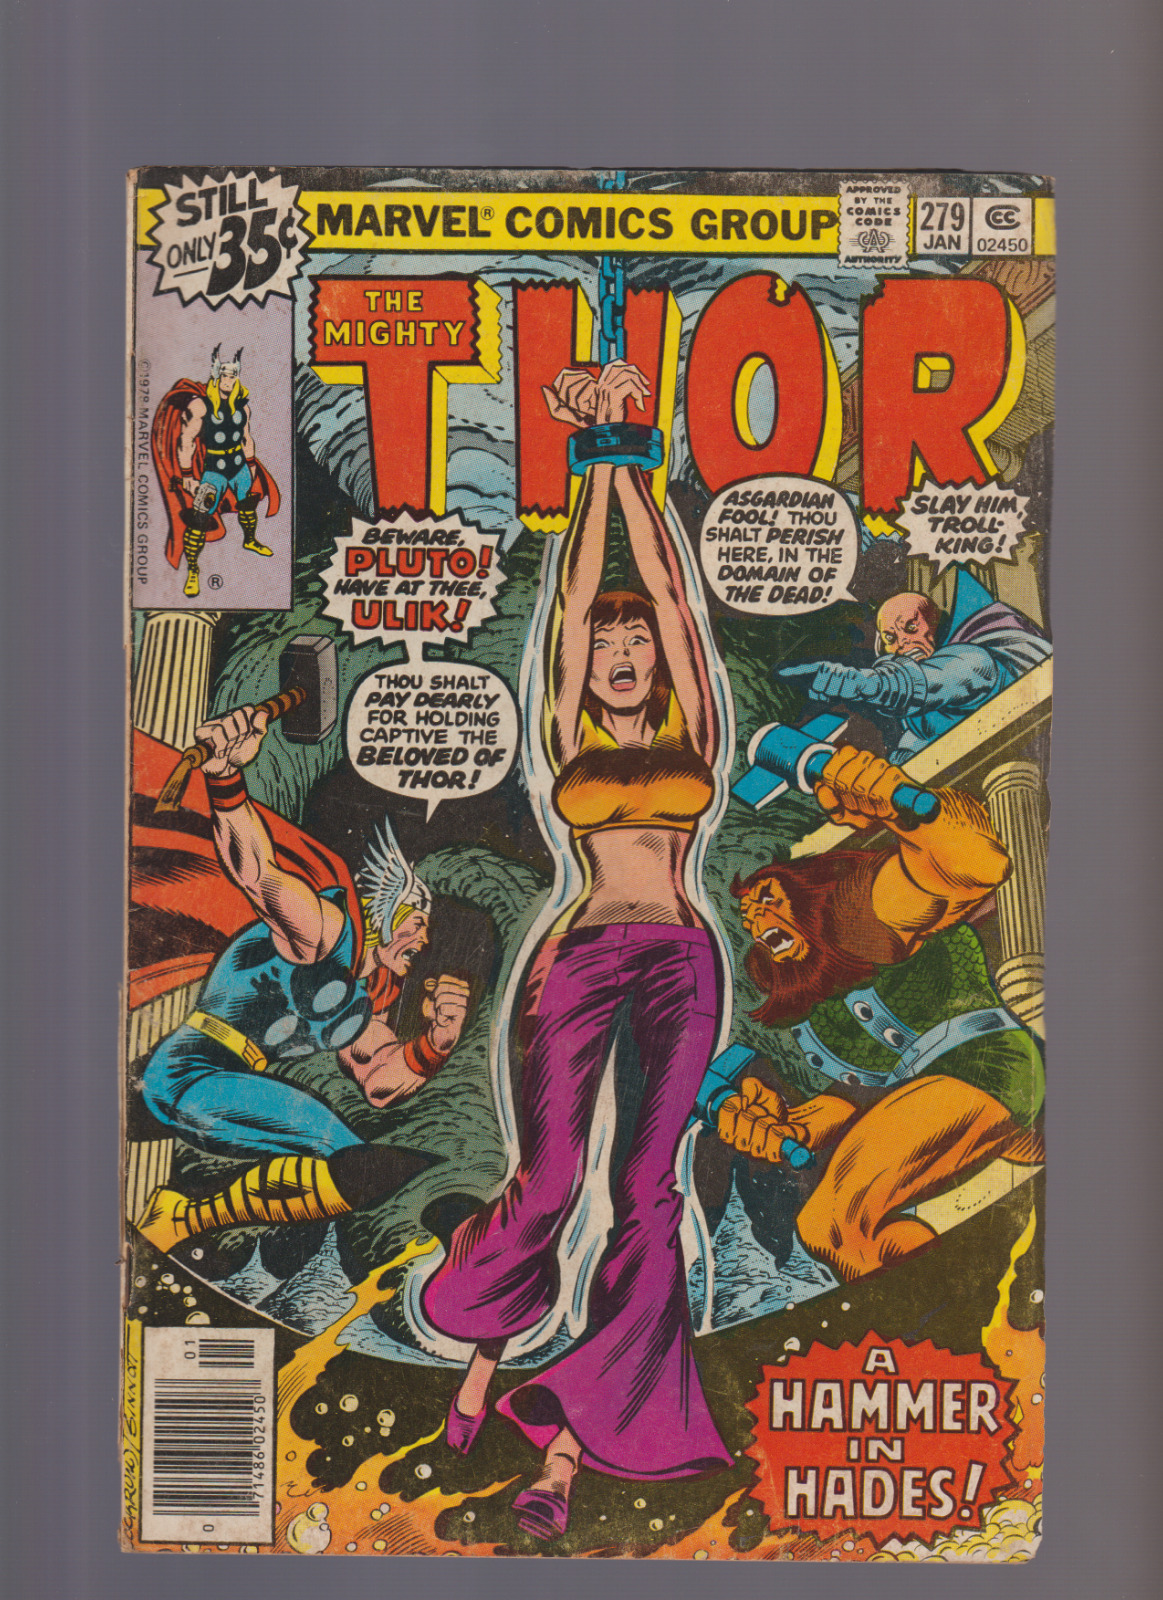 The Mighty Thor #279 (1978) CLASSIC JANEFOSTER BONDAGE COVER NEWSSTAND GD- POOR